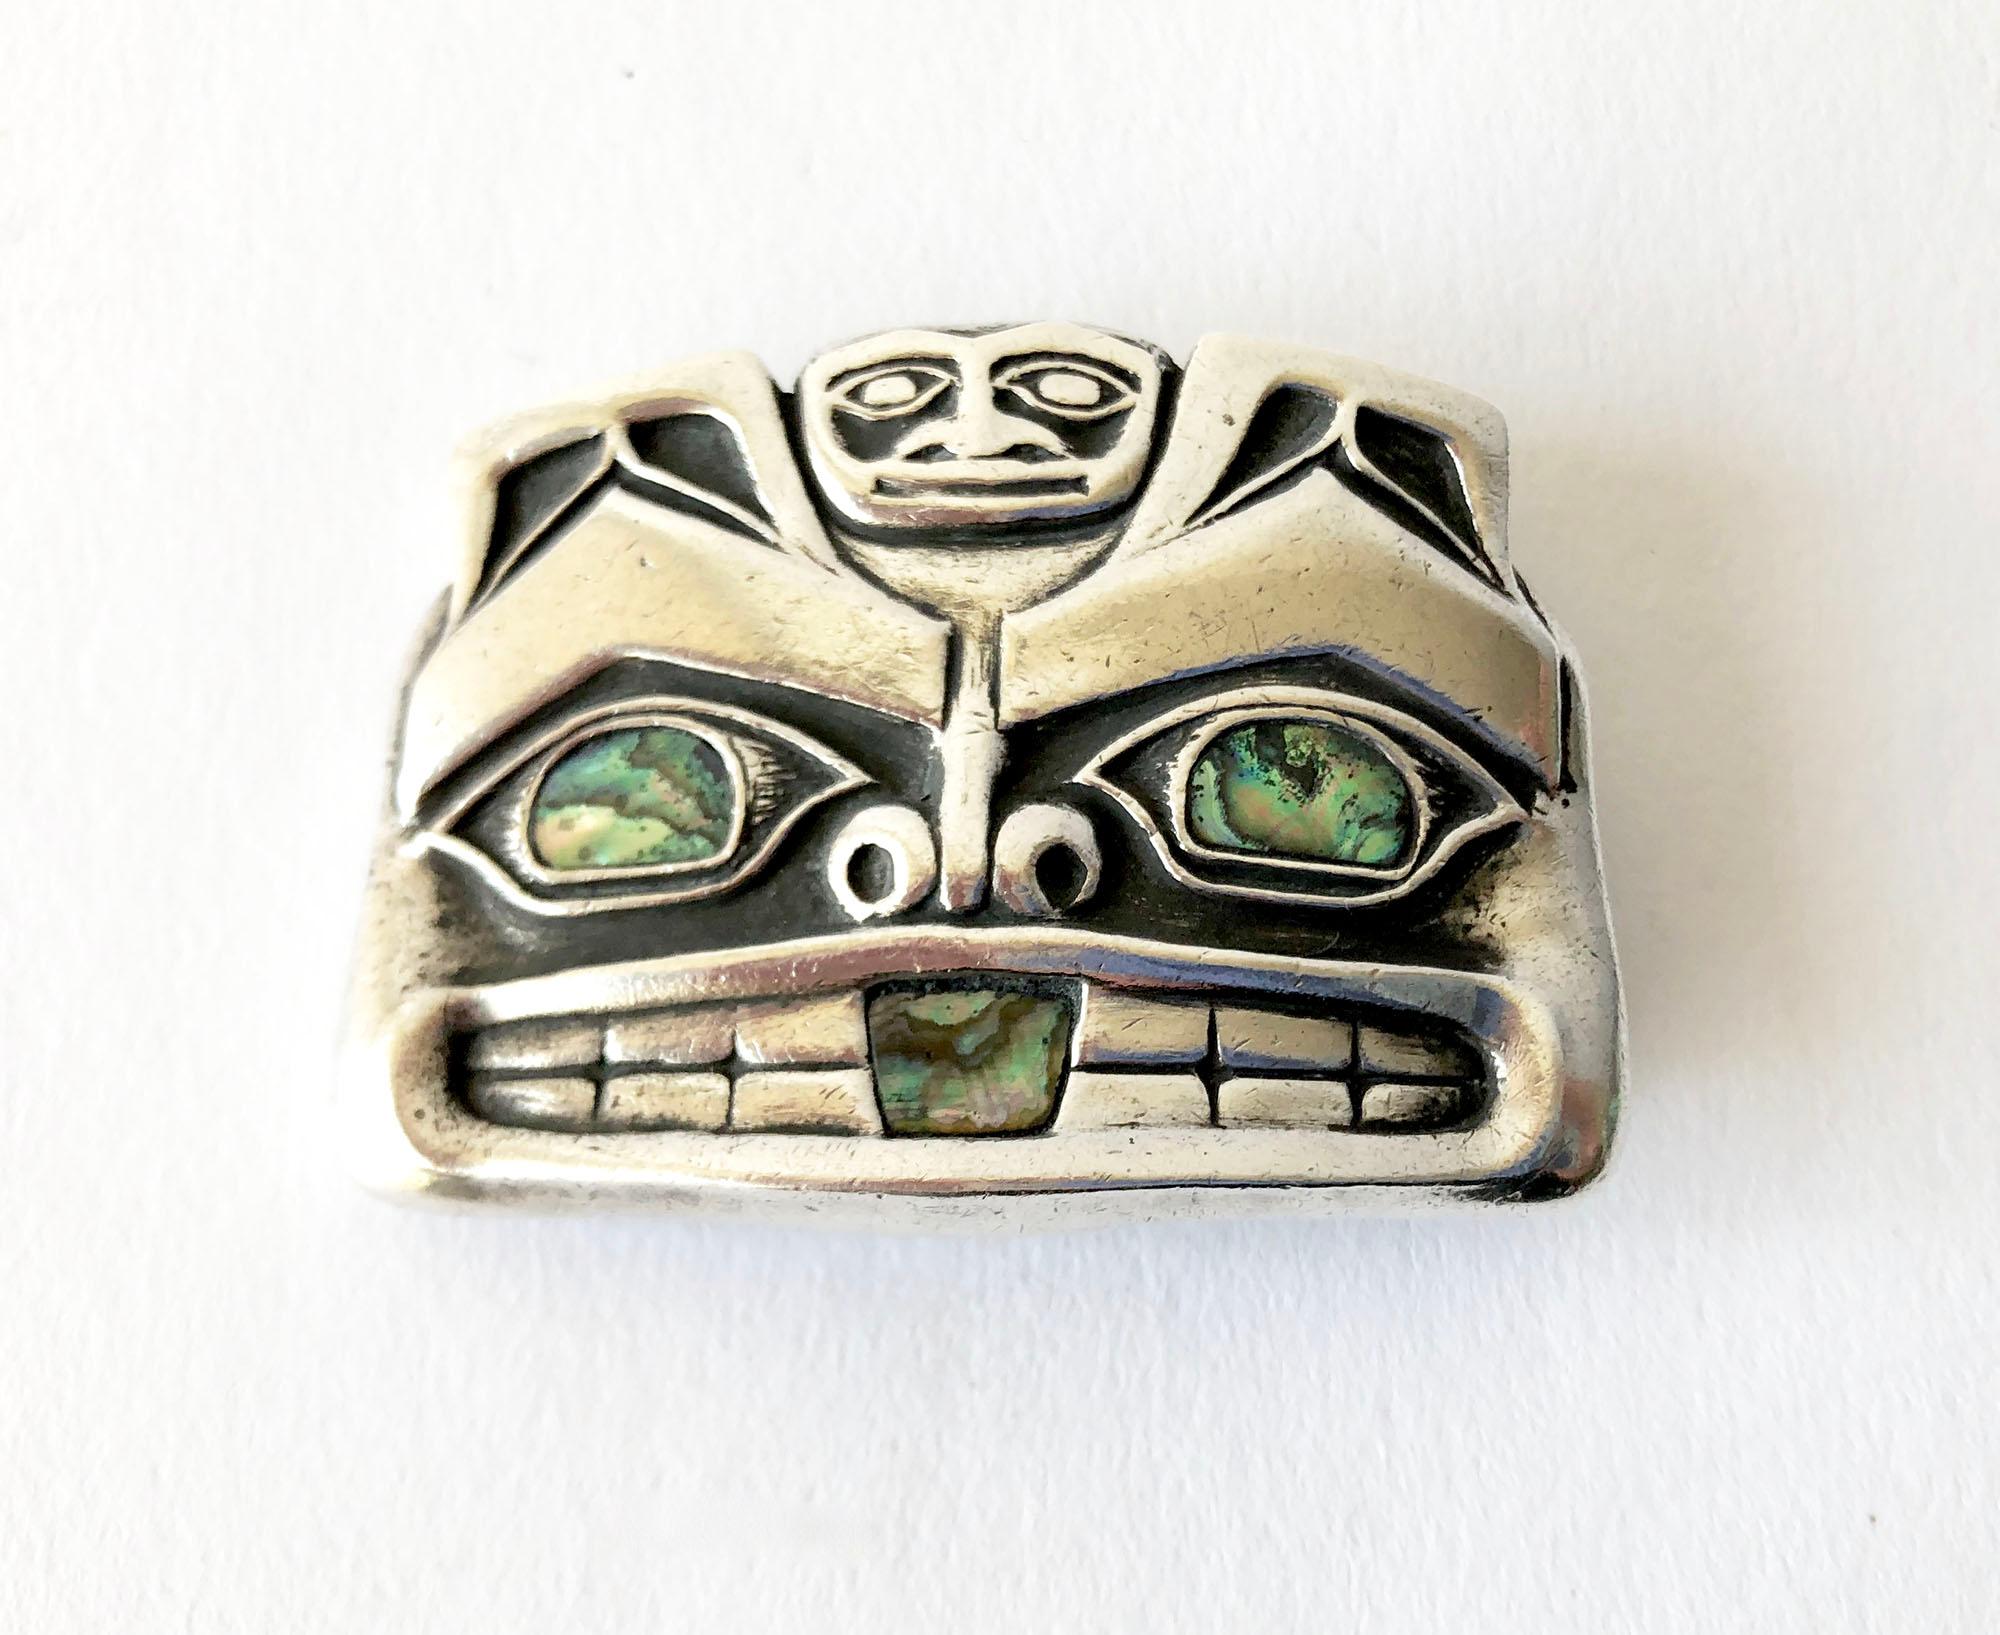 Native American Pacific northwest coast sterling silver mask money clip accented with abalone eyes and mouth.  Clip measures 1 3/8